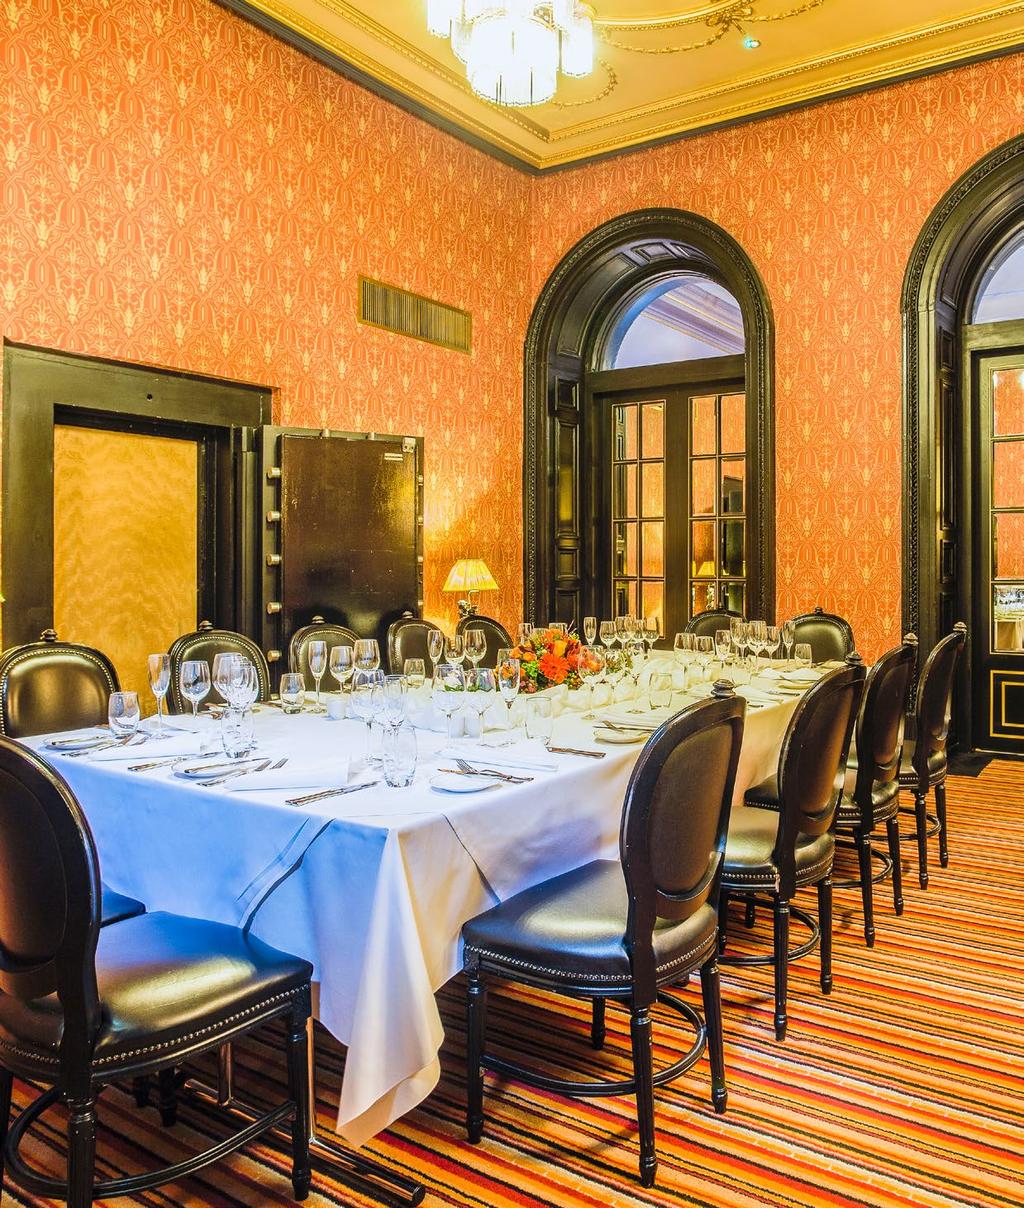 The Private Dining Room This intimate room, situated just off The Great Room Restaurant, is an ideal location for hosting a